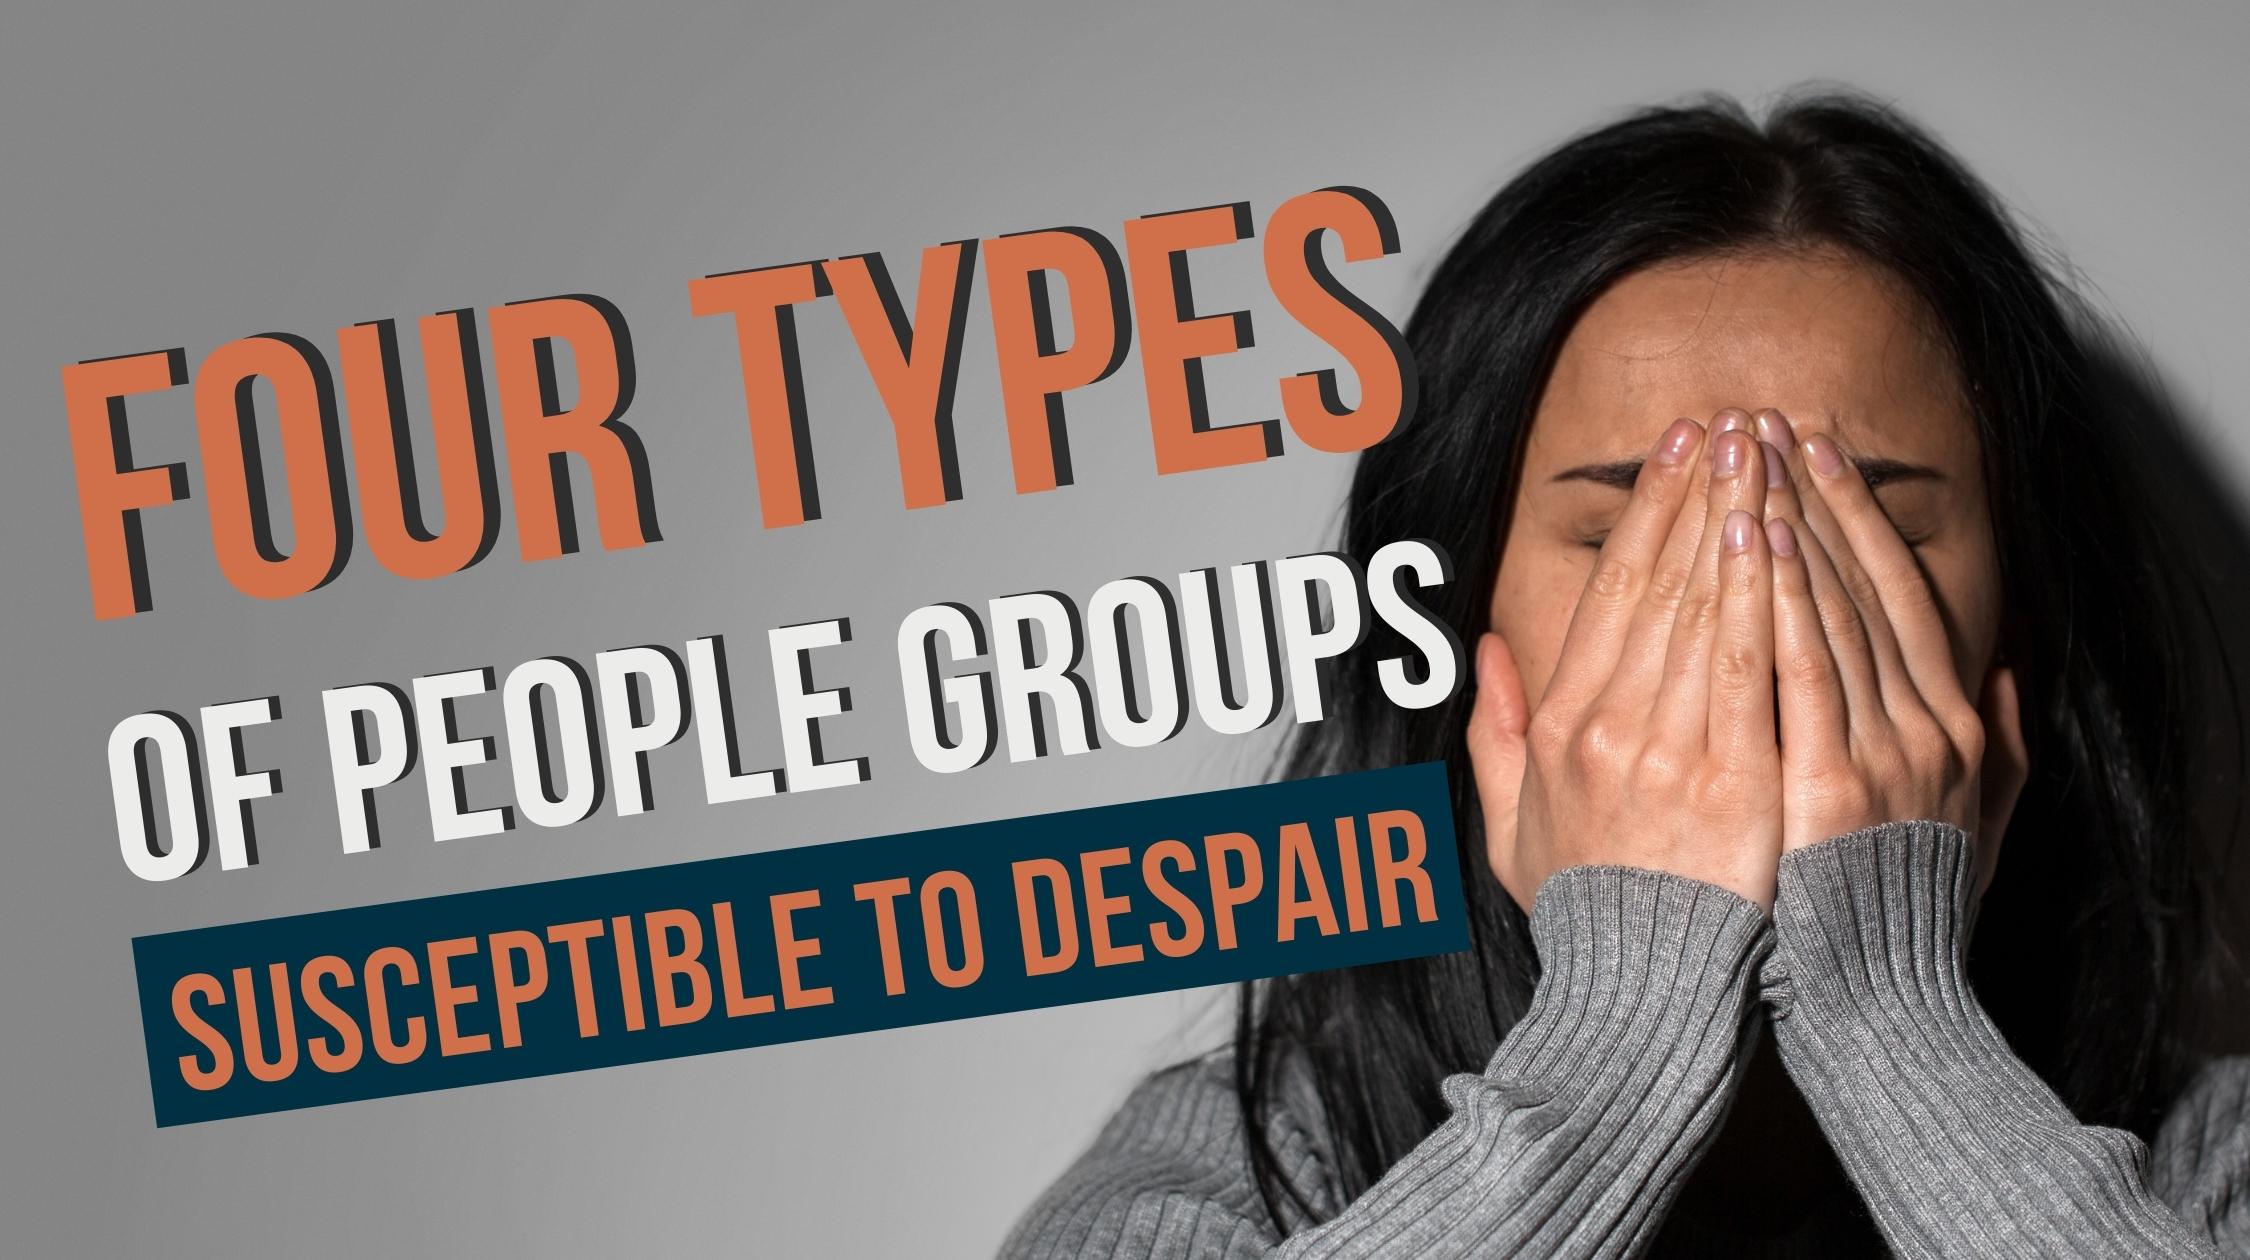 Four Types of People Susceptible to Despair